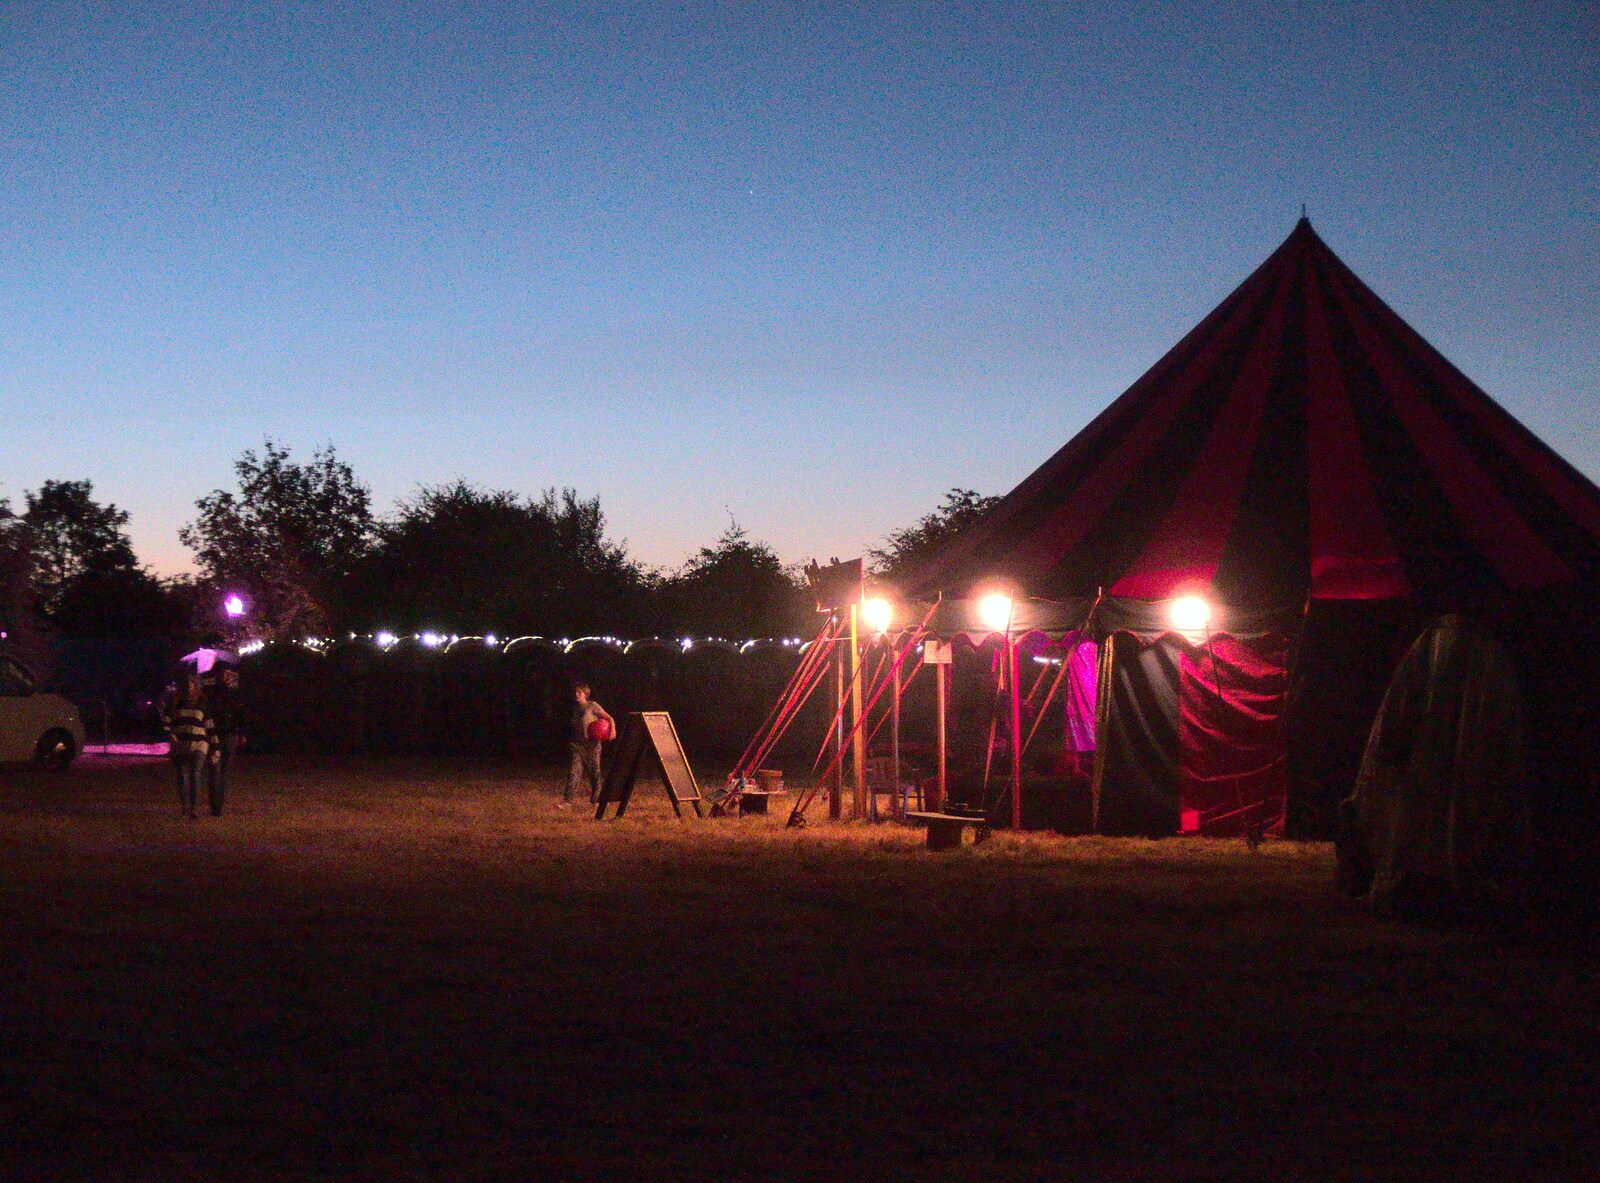 The Maui Waiu tent in the dusk from WoW Festival, Burston, Norfolk - 29th June - 1st July 2018